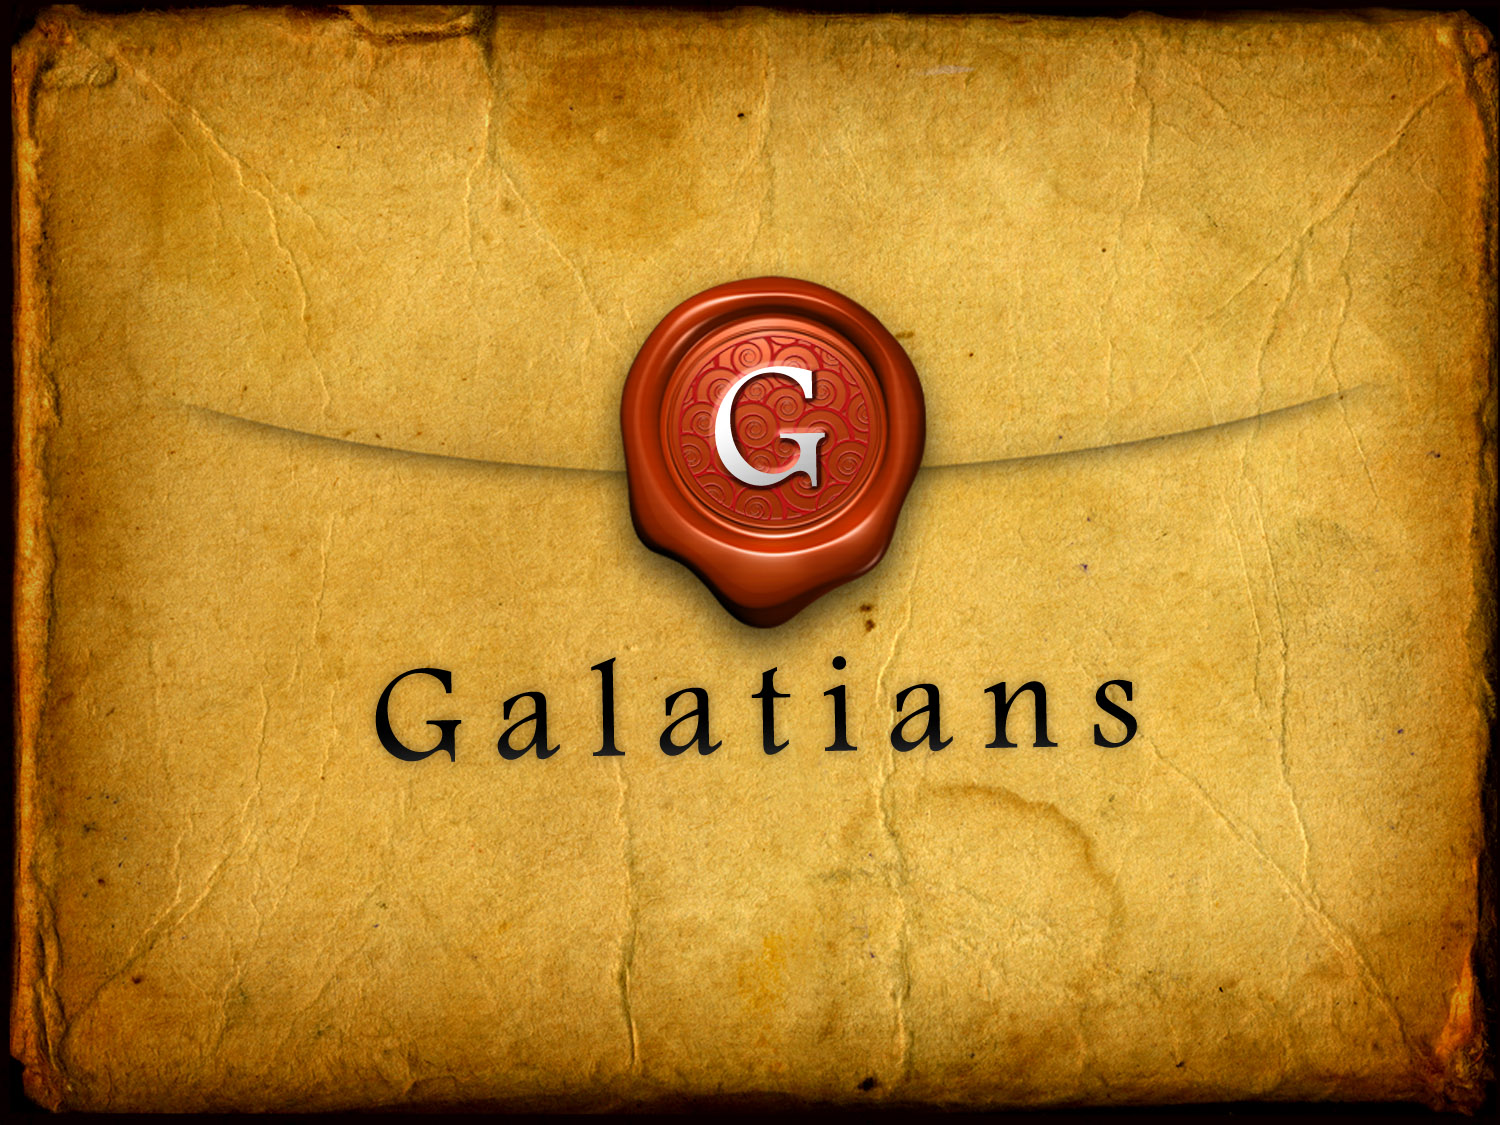 The Book of Galatians 2:11-16